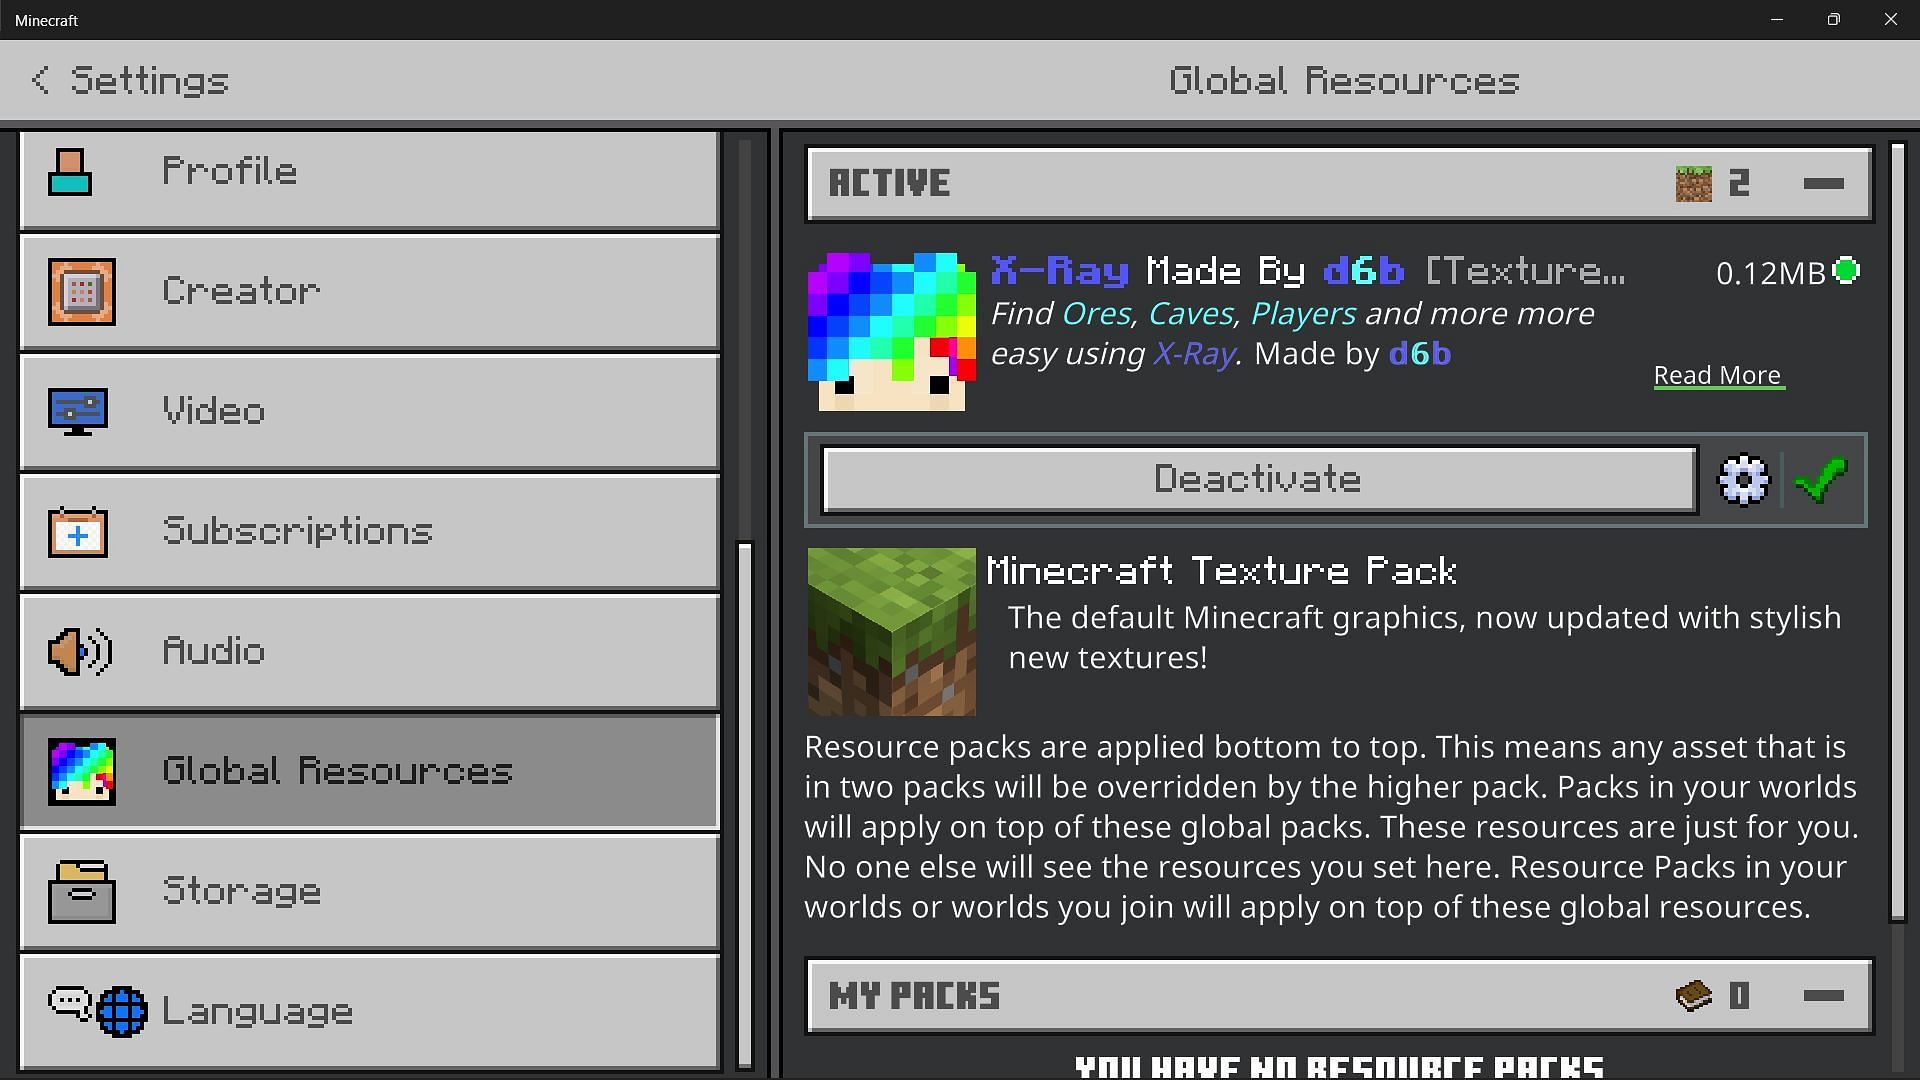 Texture pack present in the global resources settings (Image via Minecraft Bedrock Edition)